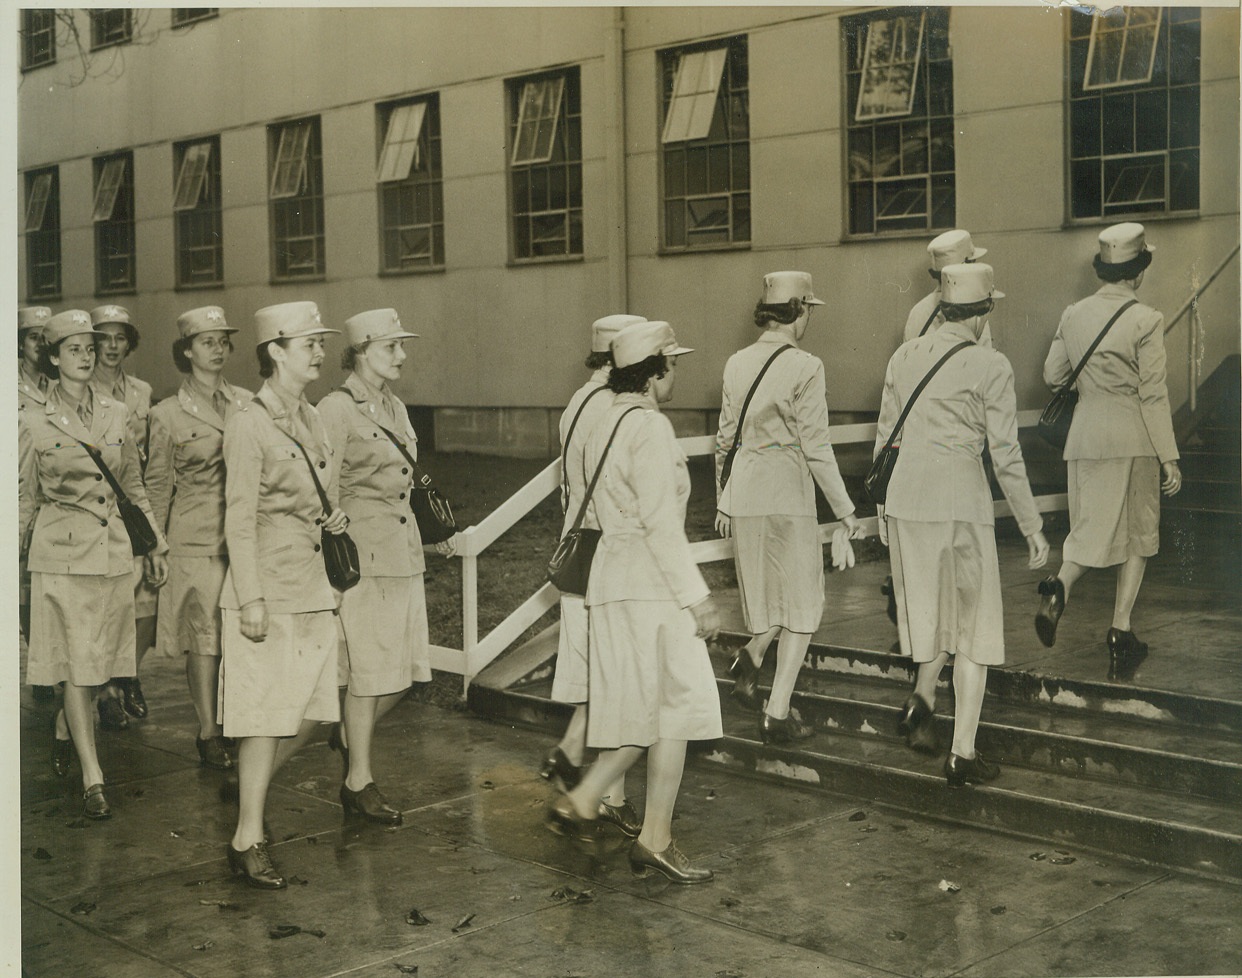 The WAACS Take Over, 9/18/1942. Washington, D.C. – A group of WAACs march into one of the War Department’s temporary buildings as they reported for duty on Sept. 18th to take the place of male officers in office work. Credit: (ACME);